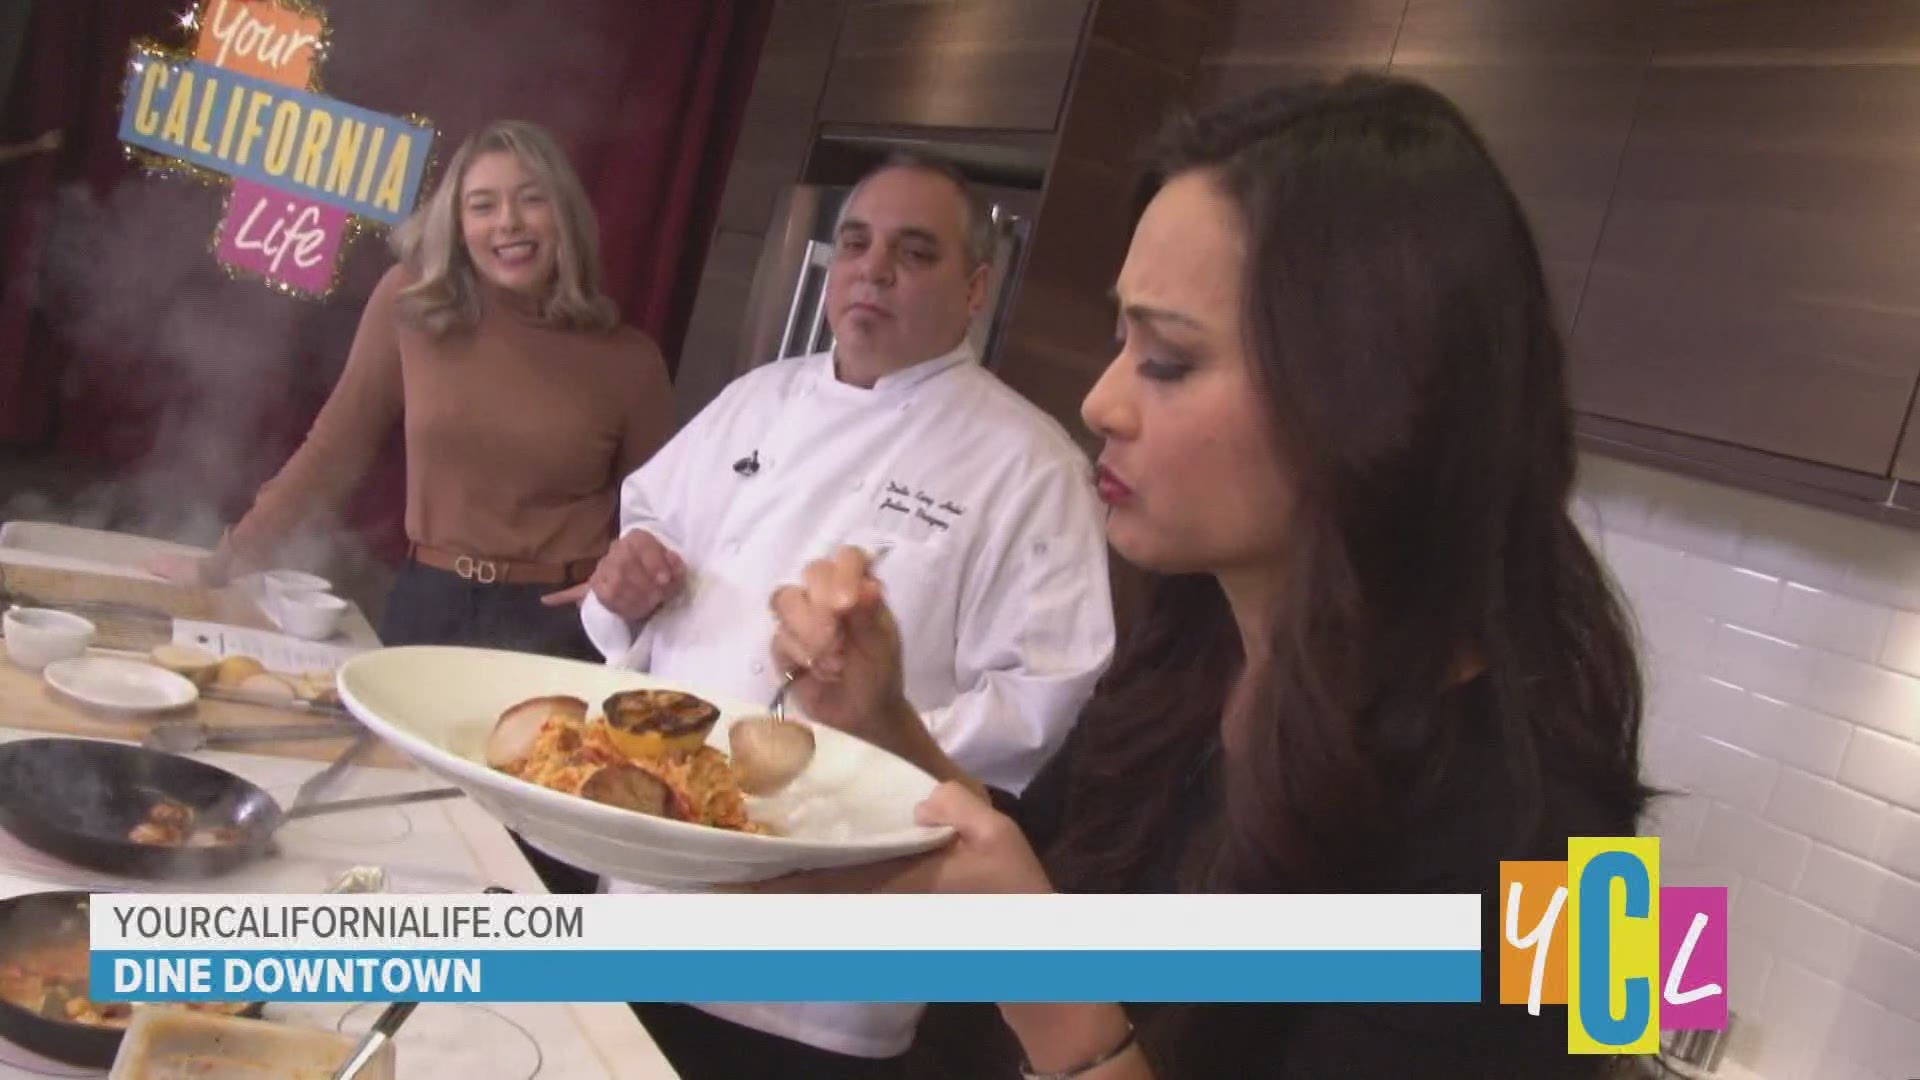 The 15th annual Dine Downtown Restaurant Week is a cost-effective way for local foodies and families to explore downtown and midtown Sacramento’s top restaurants.